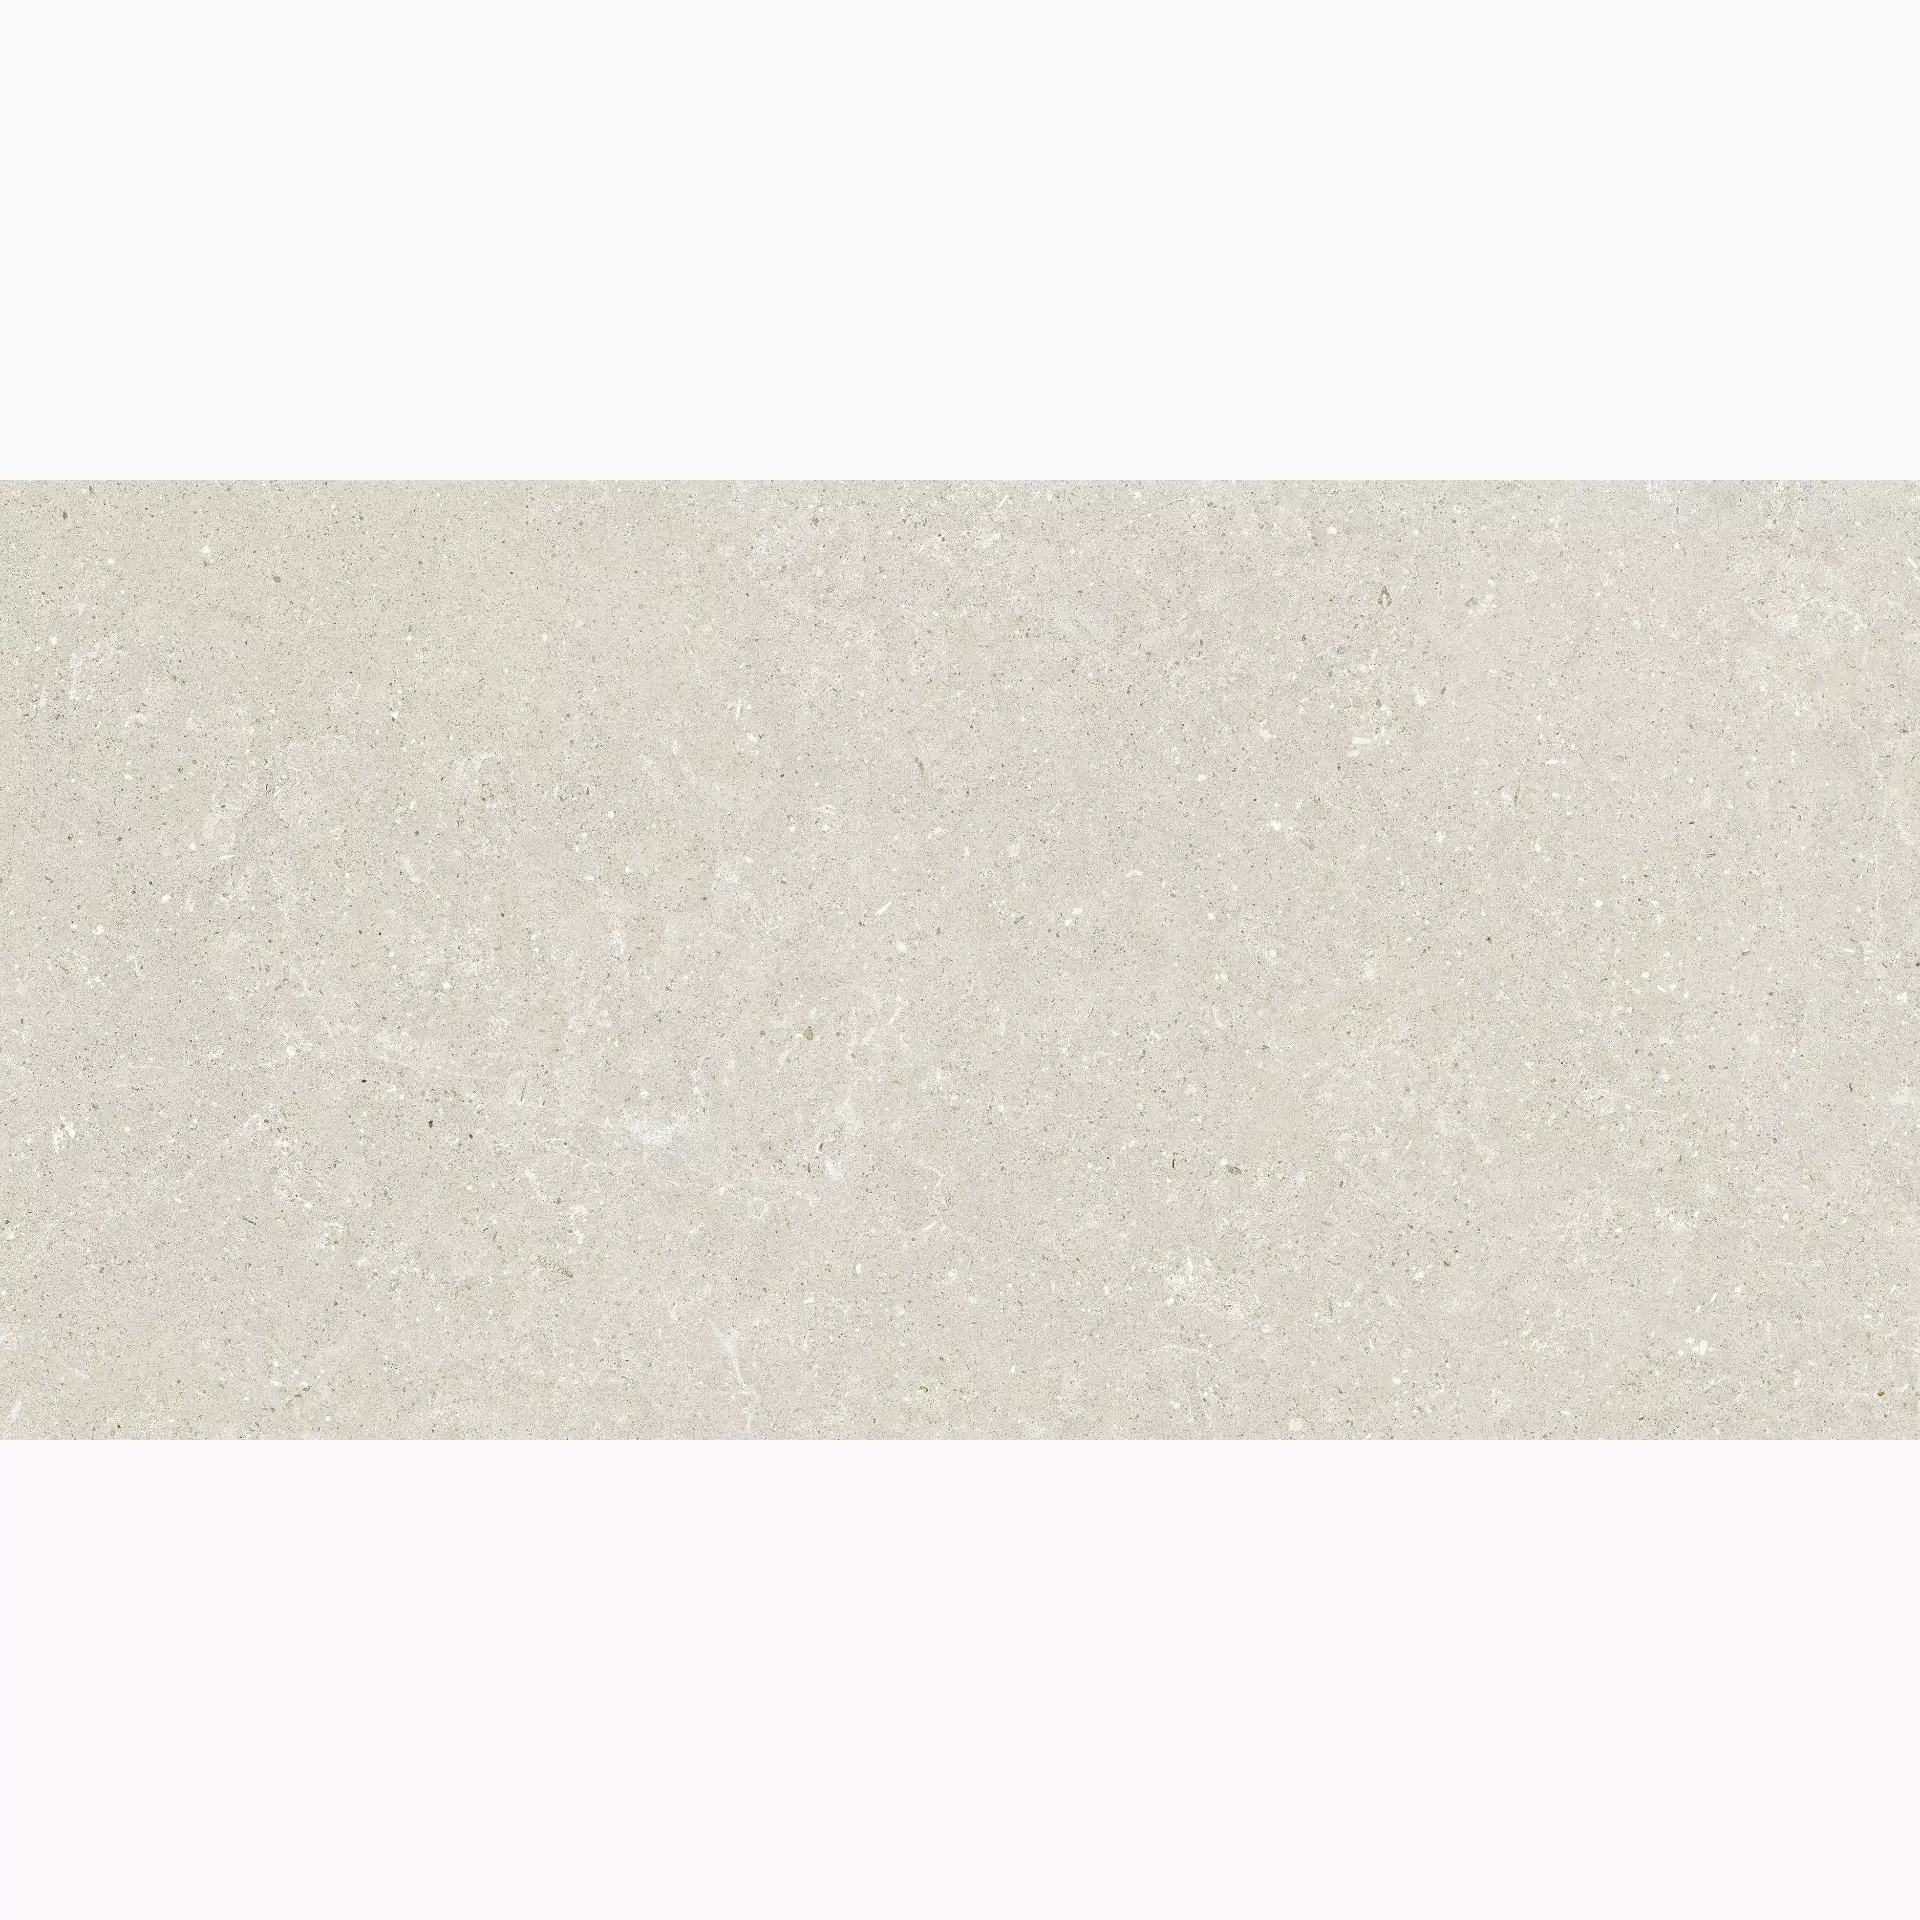 Del Conca Hwd Wild White Hwd Naturale GCWD10R 60x120cm rectified 8,5mm